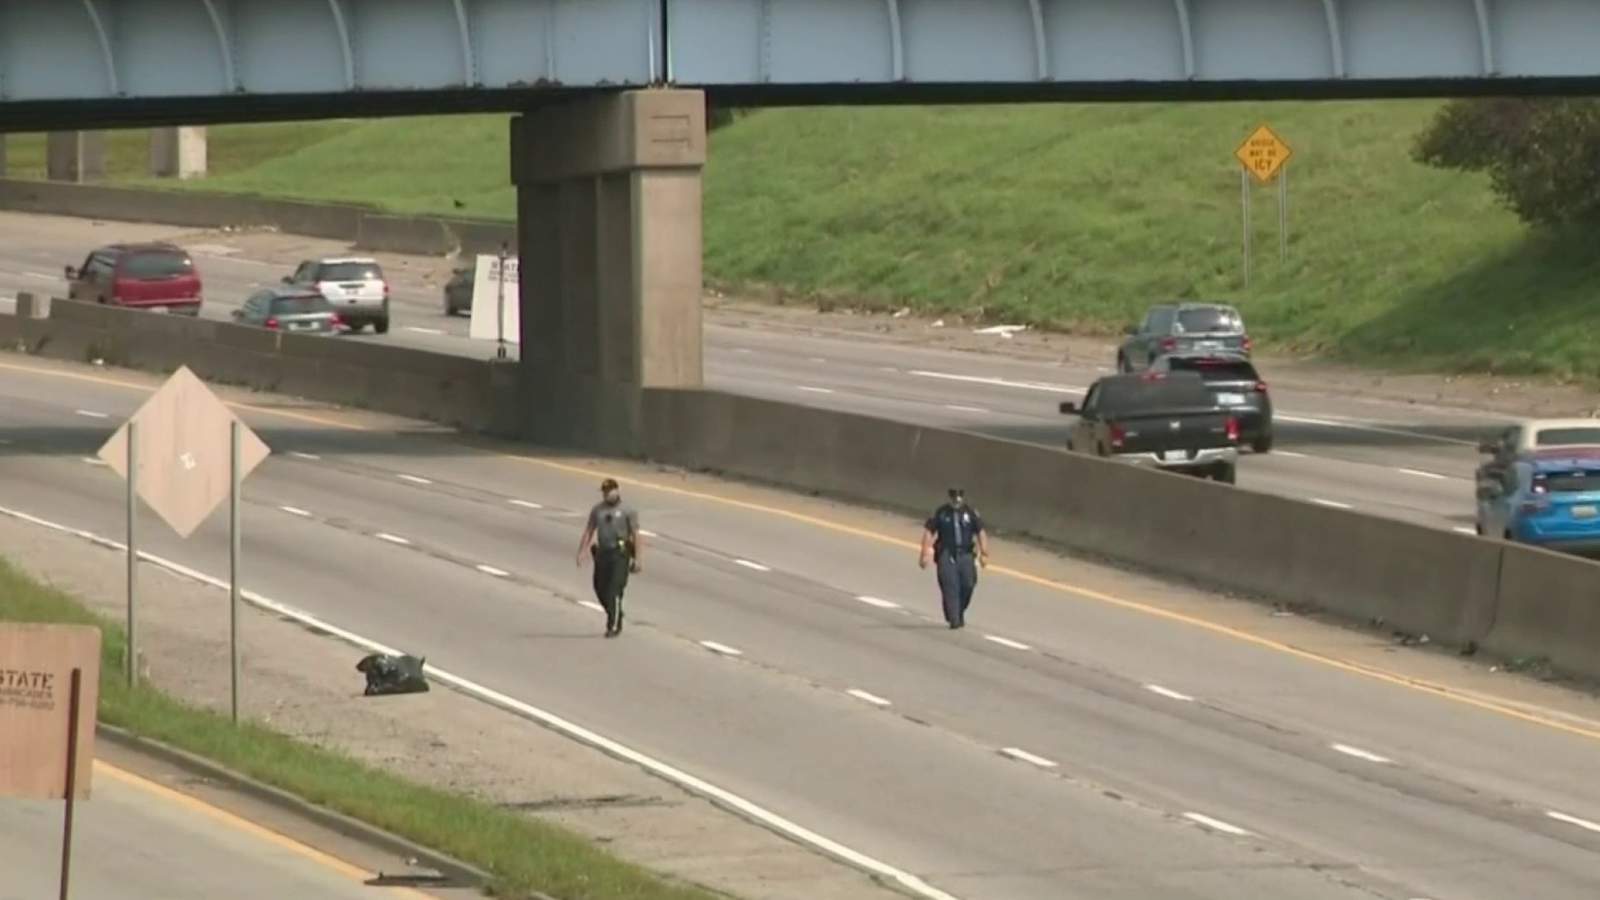 Road rage sparks shooting on WB I-94 near I-75, police say